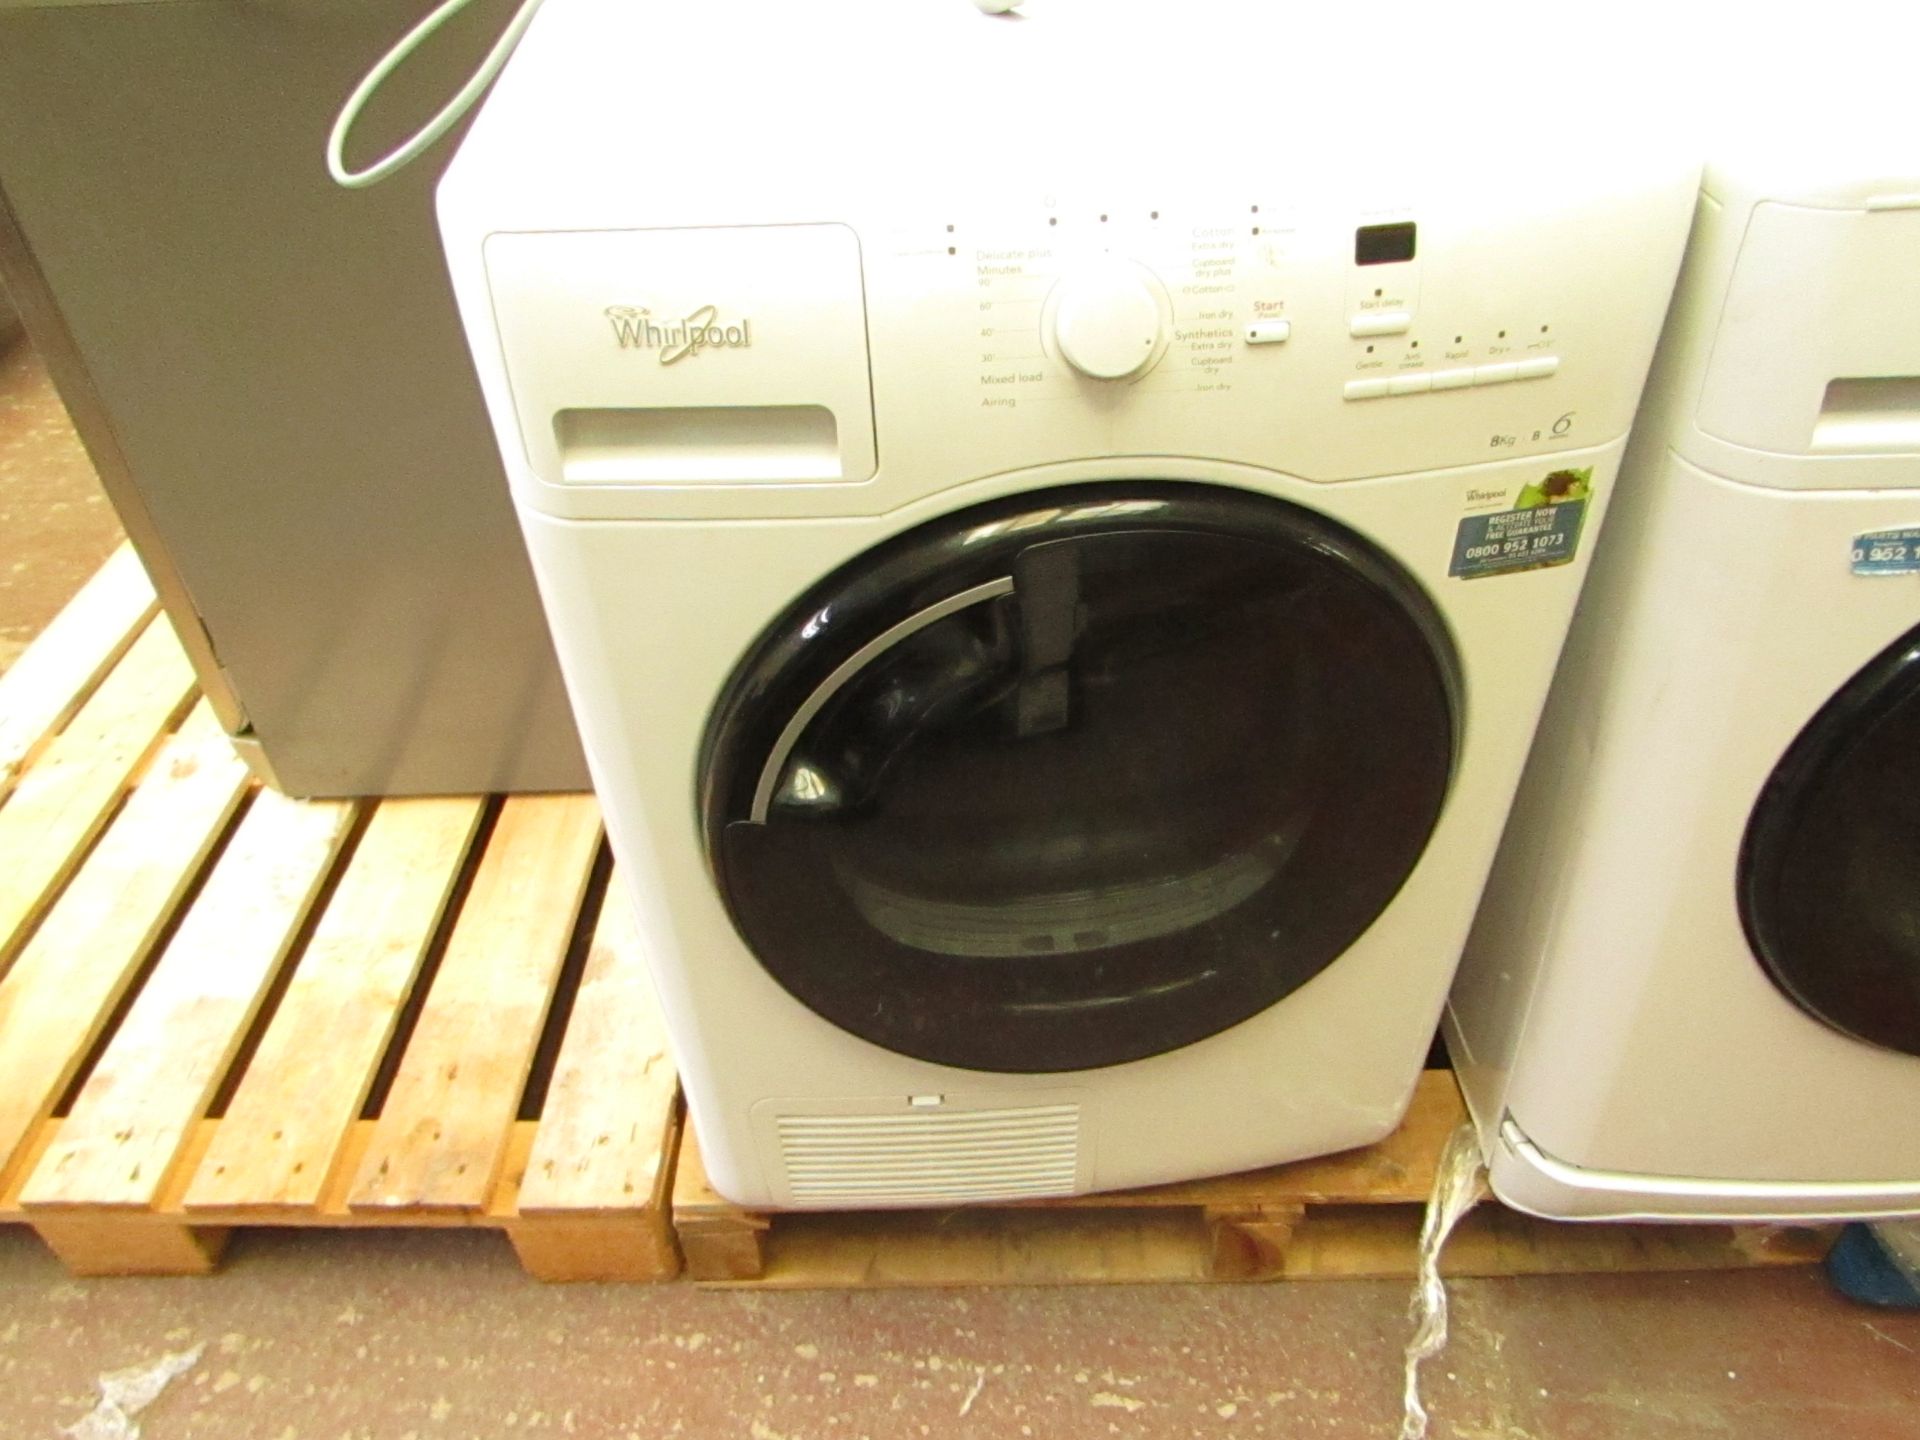 Whirlpool 8kg Dryer. Tested working.